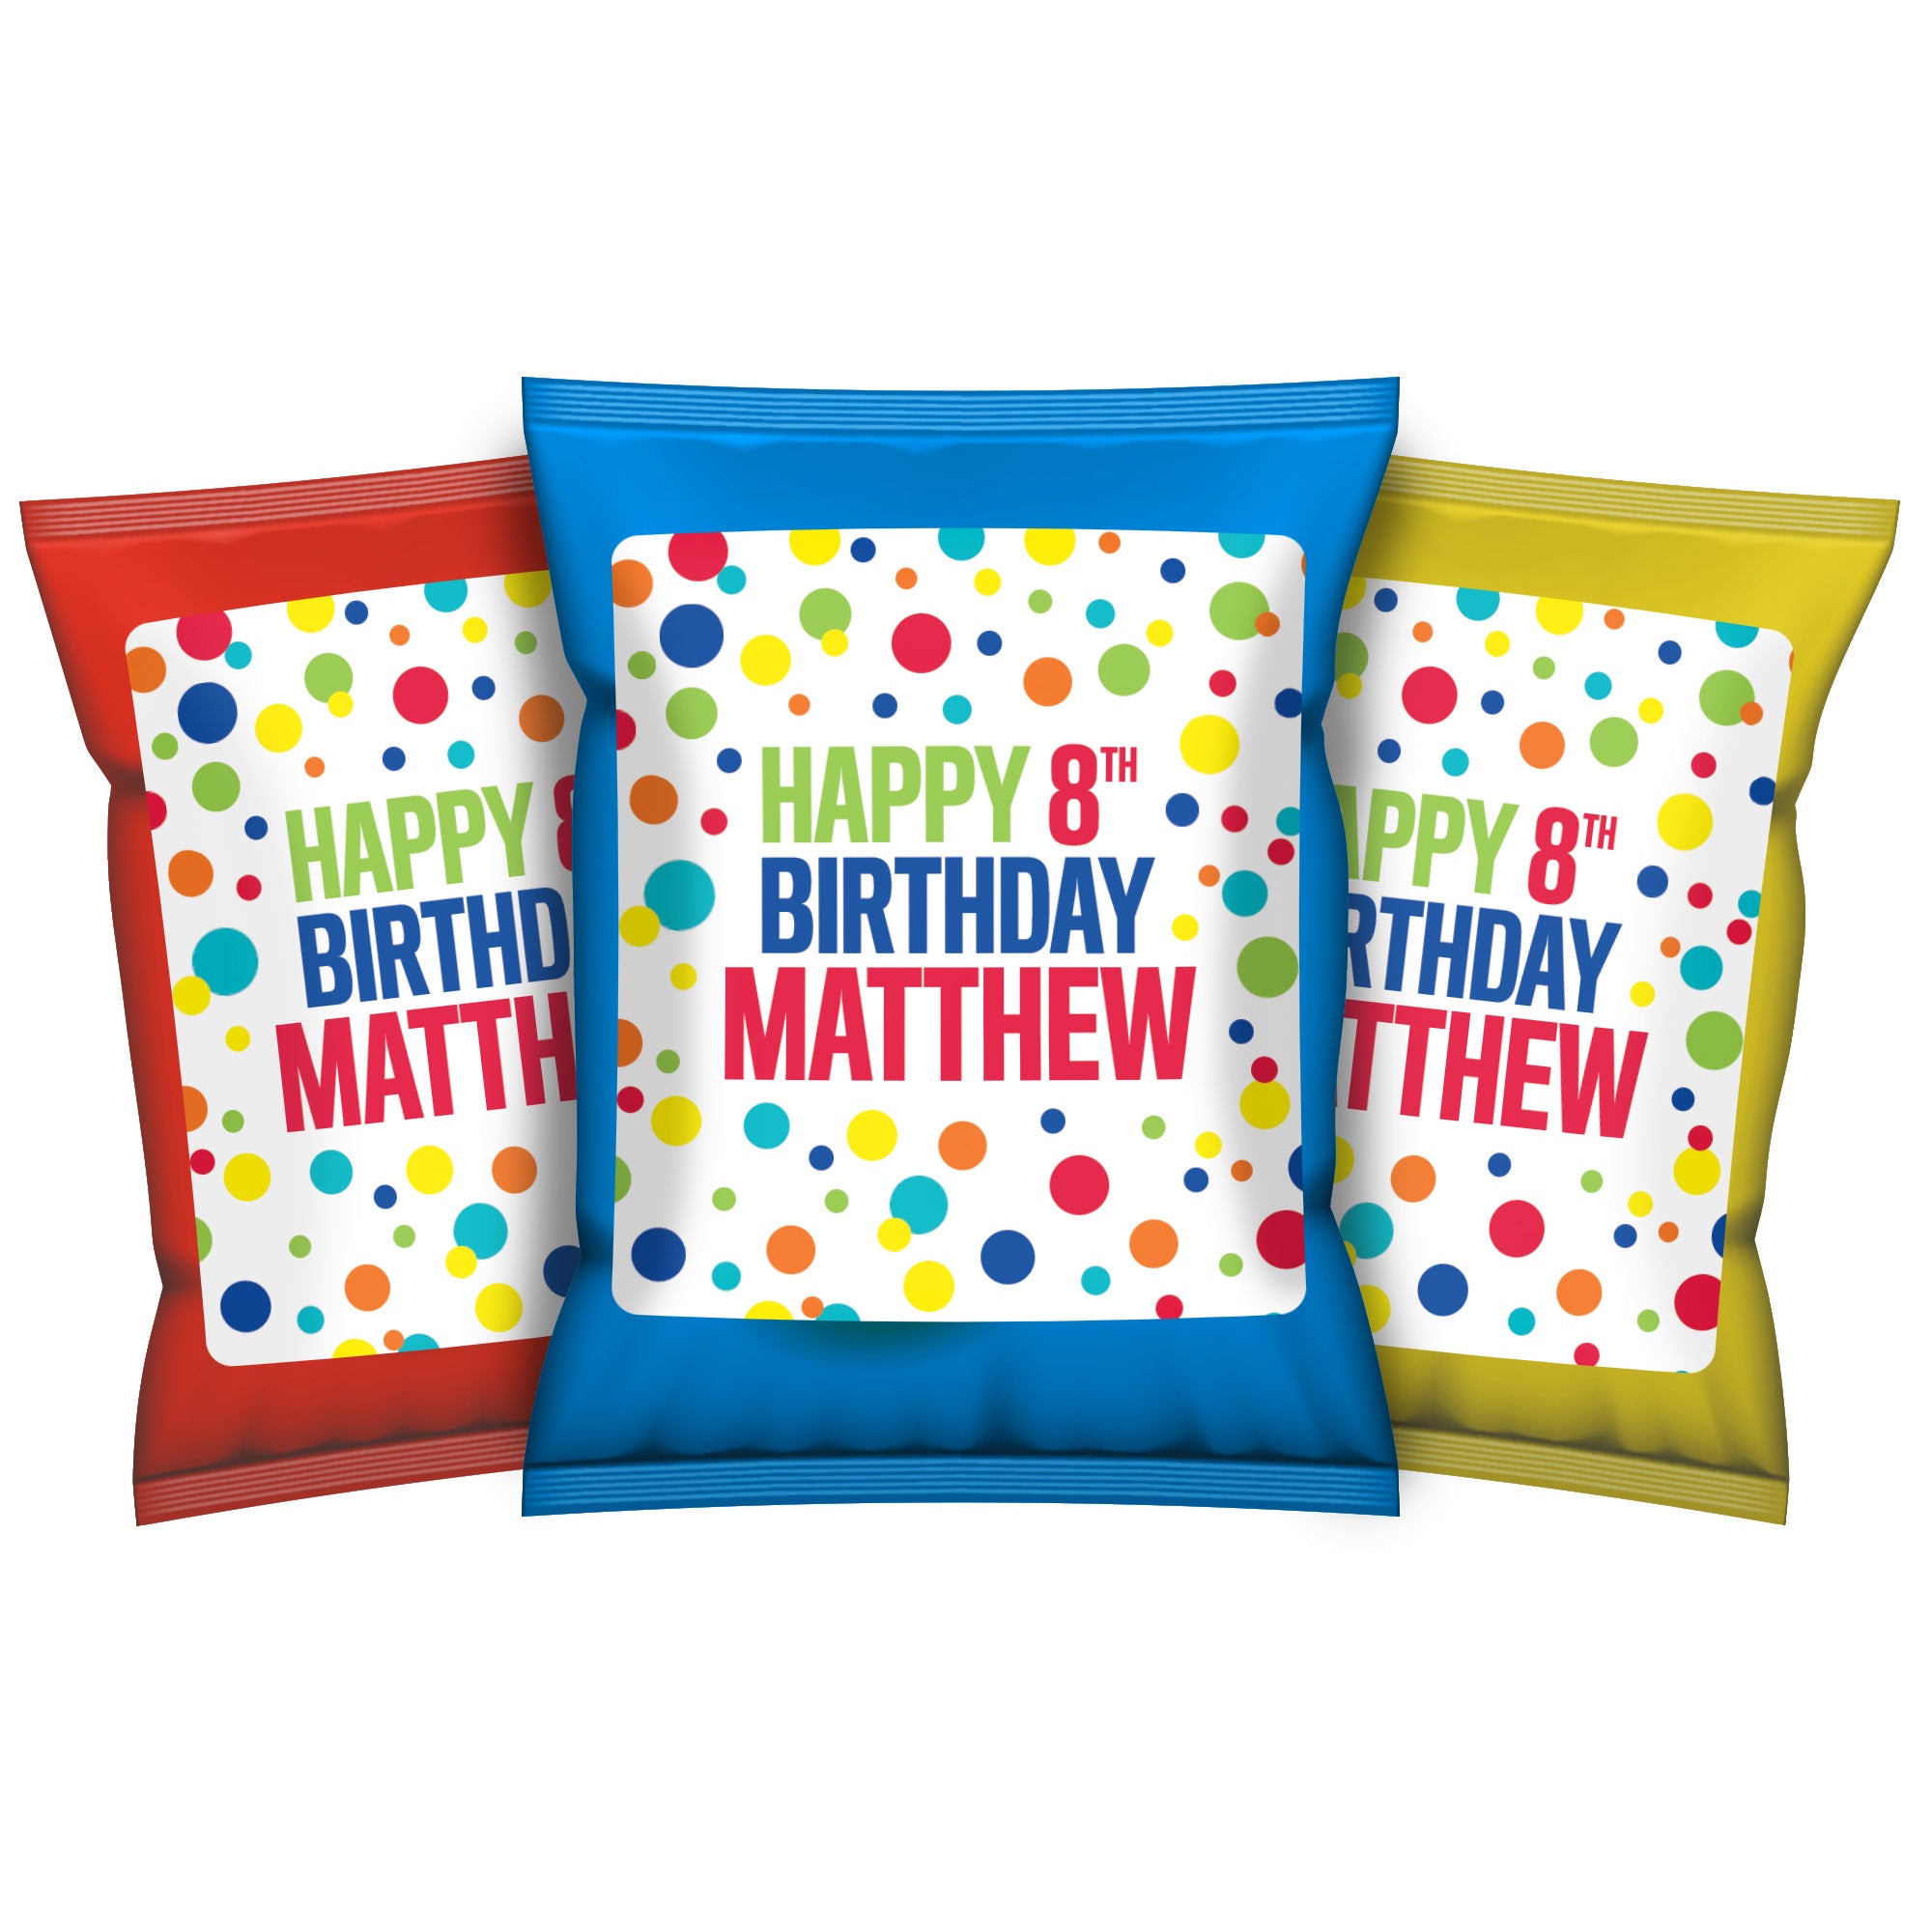 Personalized Rainbow Dots -  Kid's Birthday, Adult Birthday - Chip Bag and Snack Bag Stickers - 32 Pack